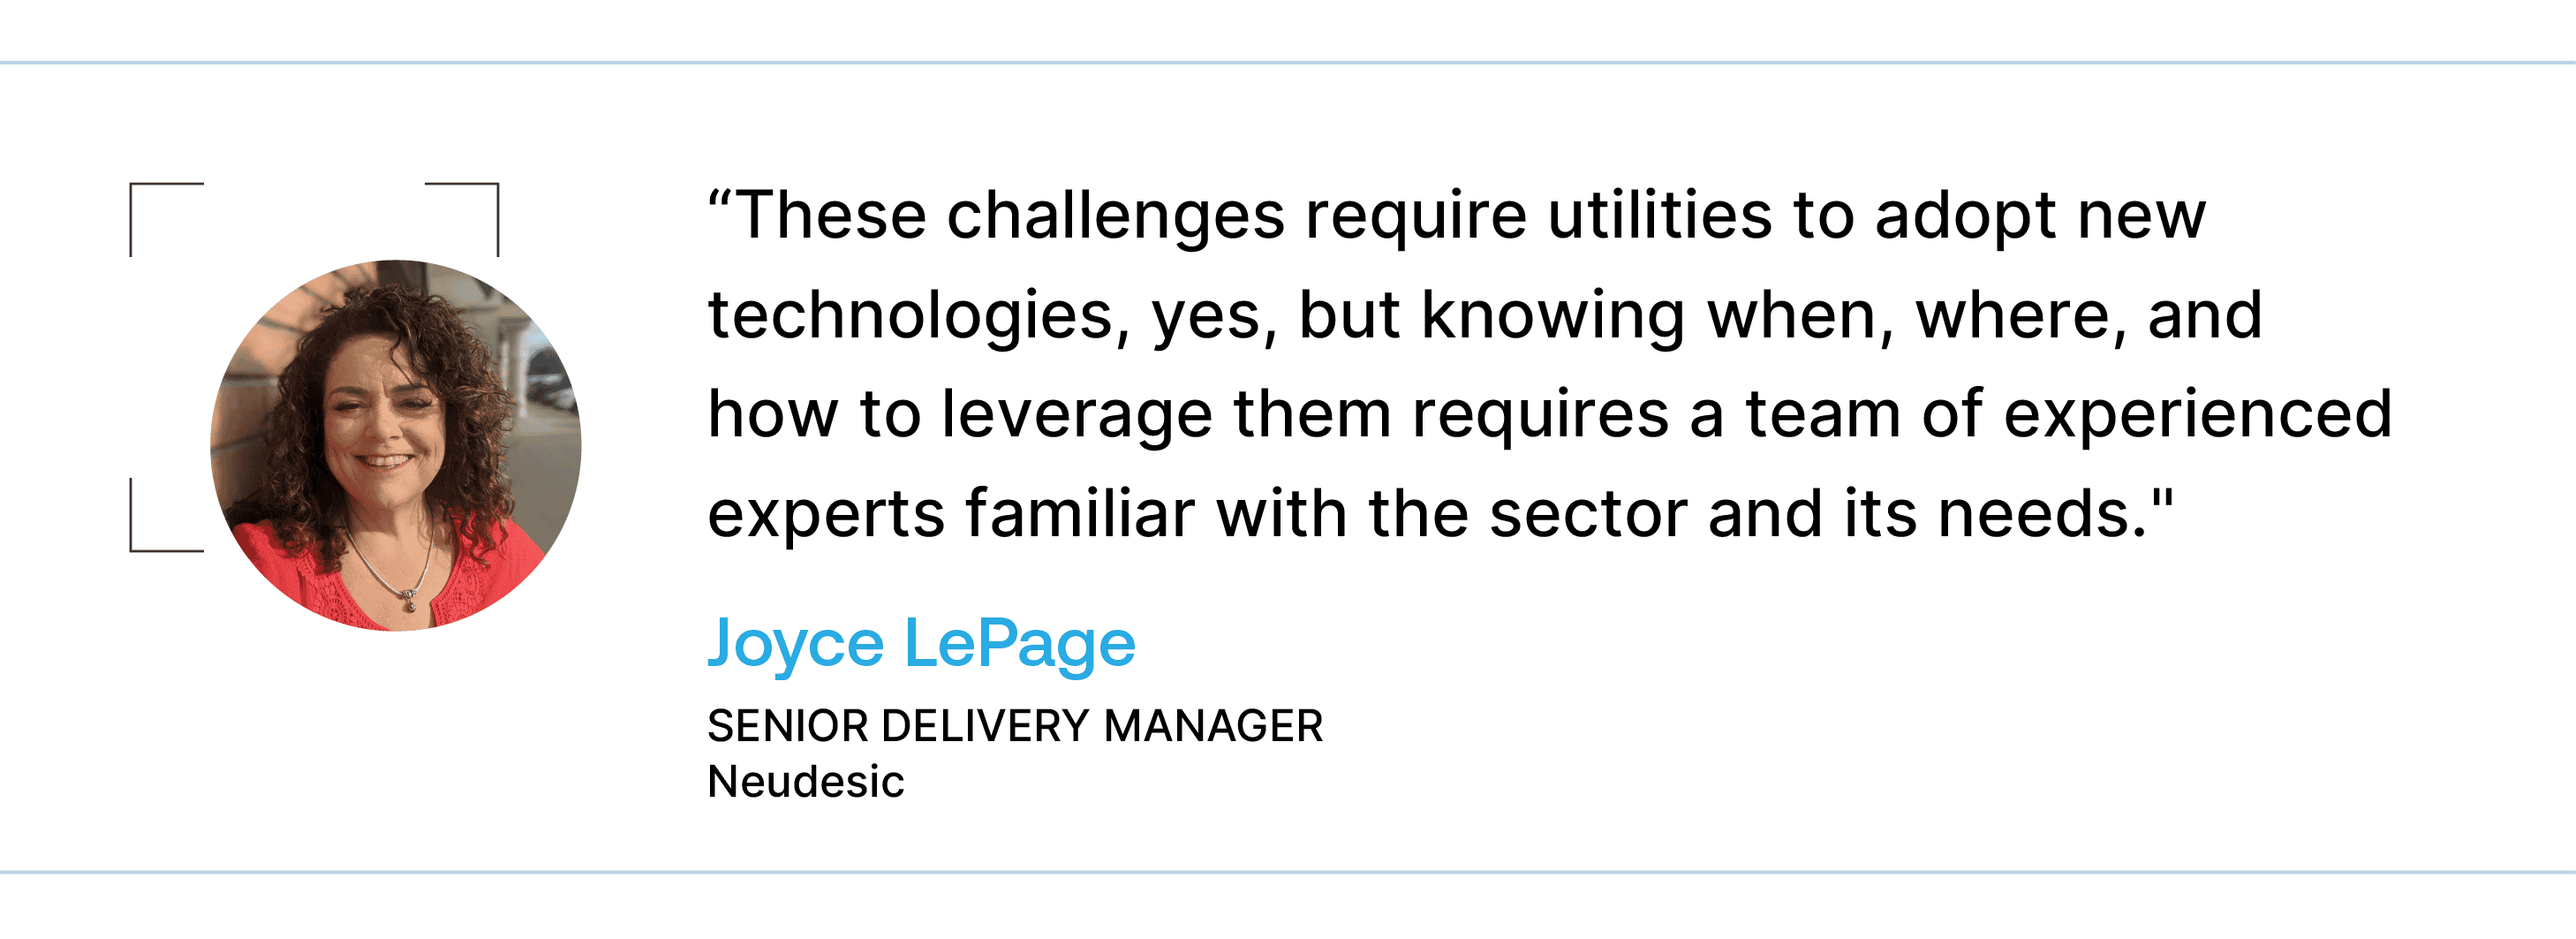 AI in Utilities consultant Joyce LePage's quote on the value of subject matter expertise